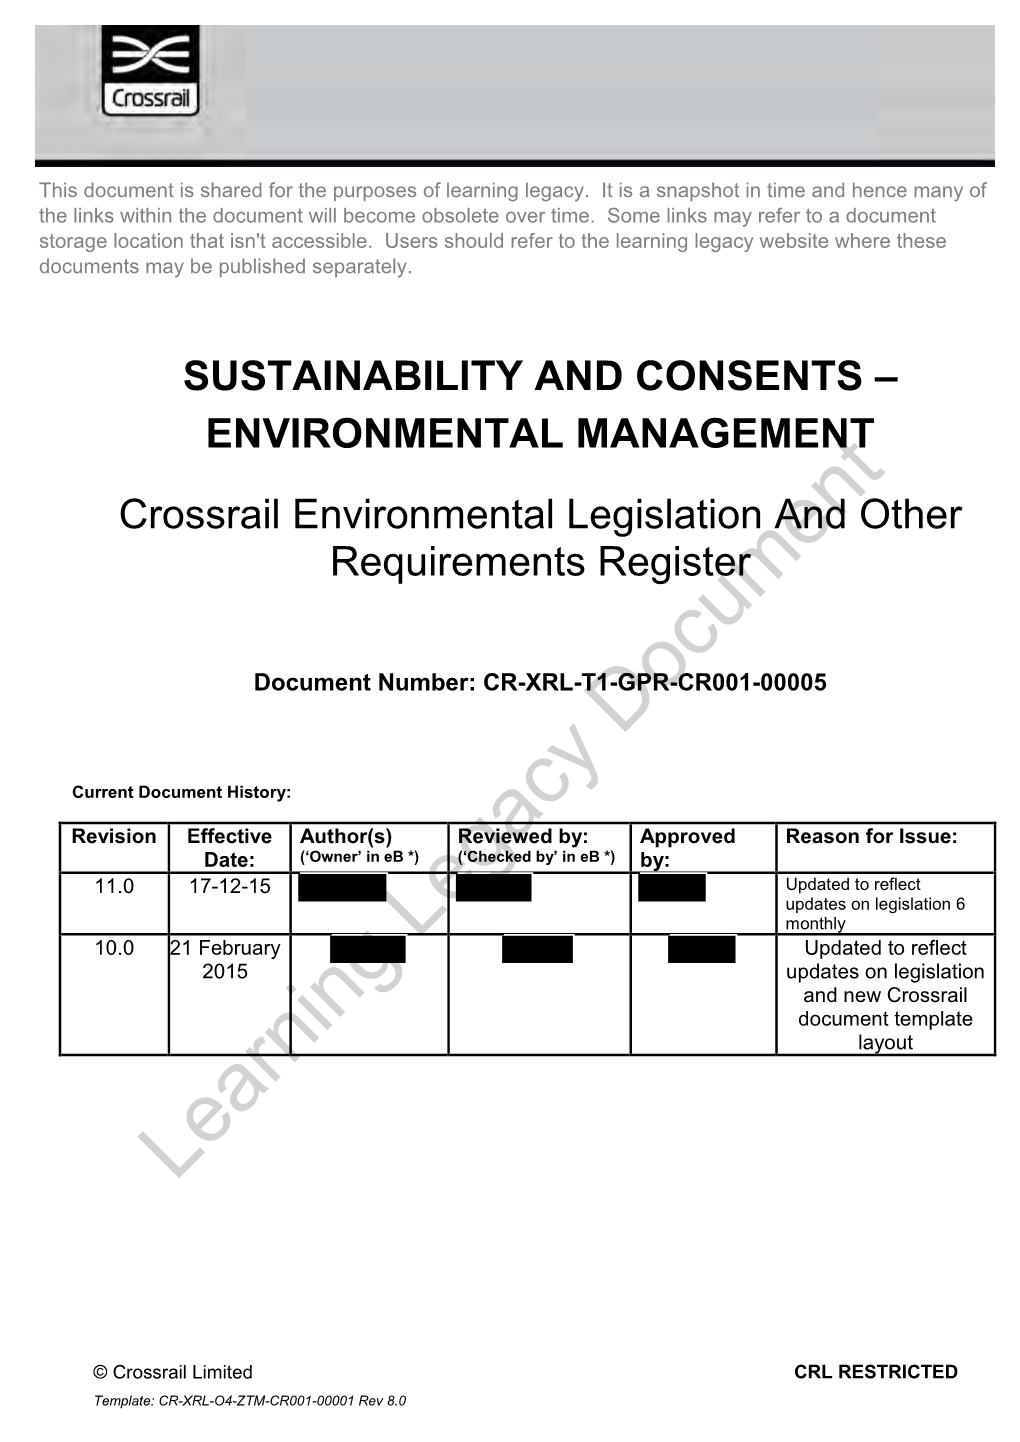 Environmental Legislation and Other Requirements Register